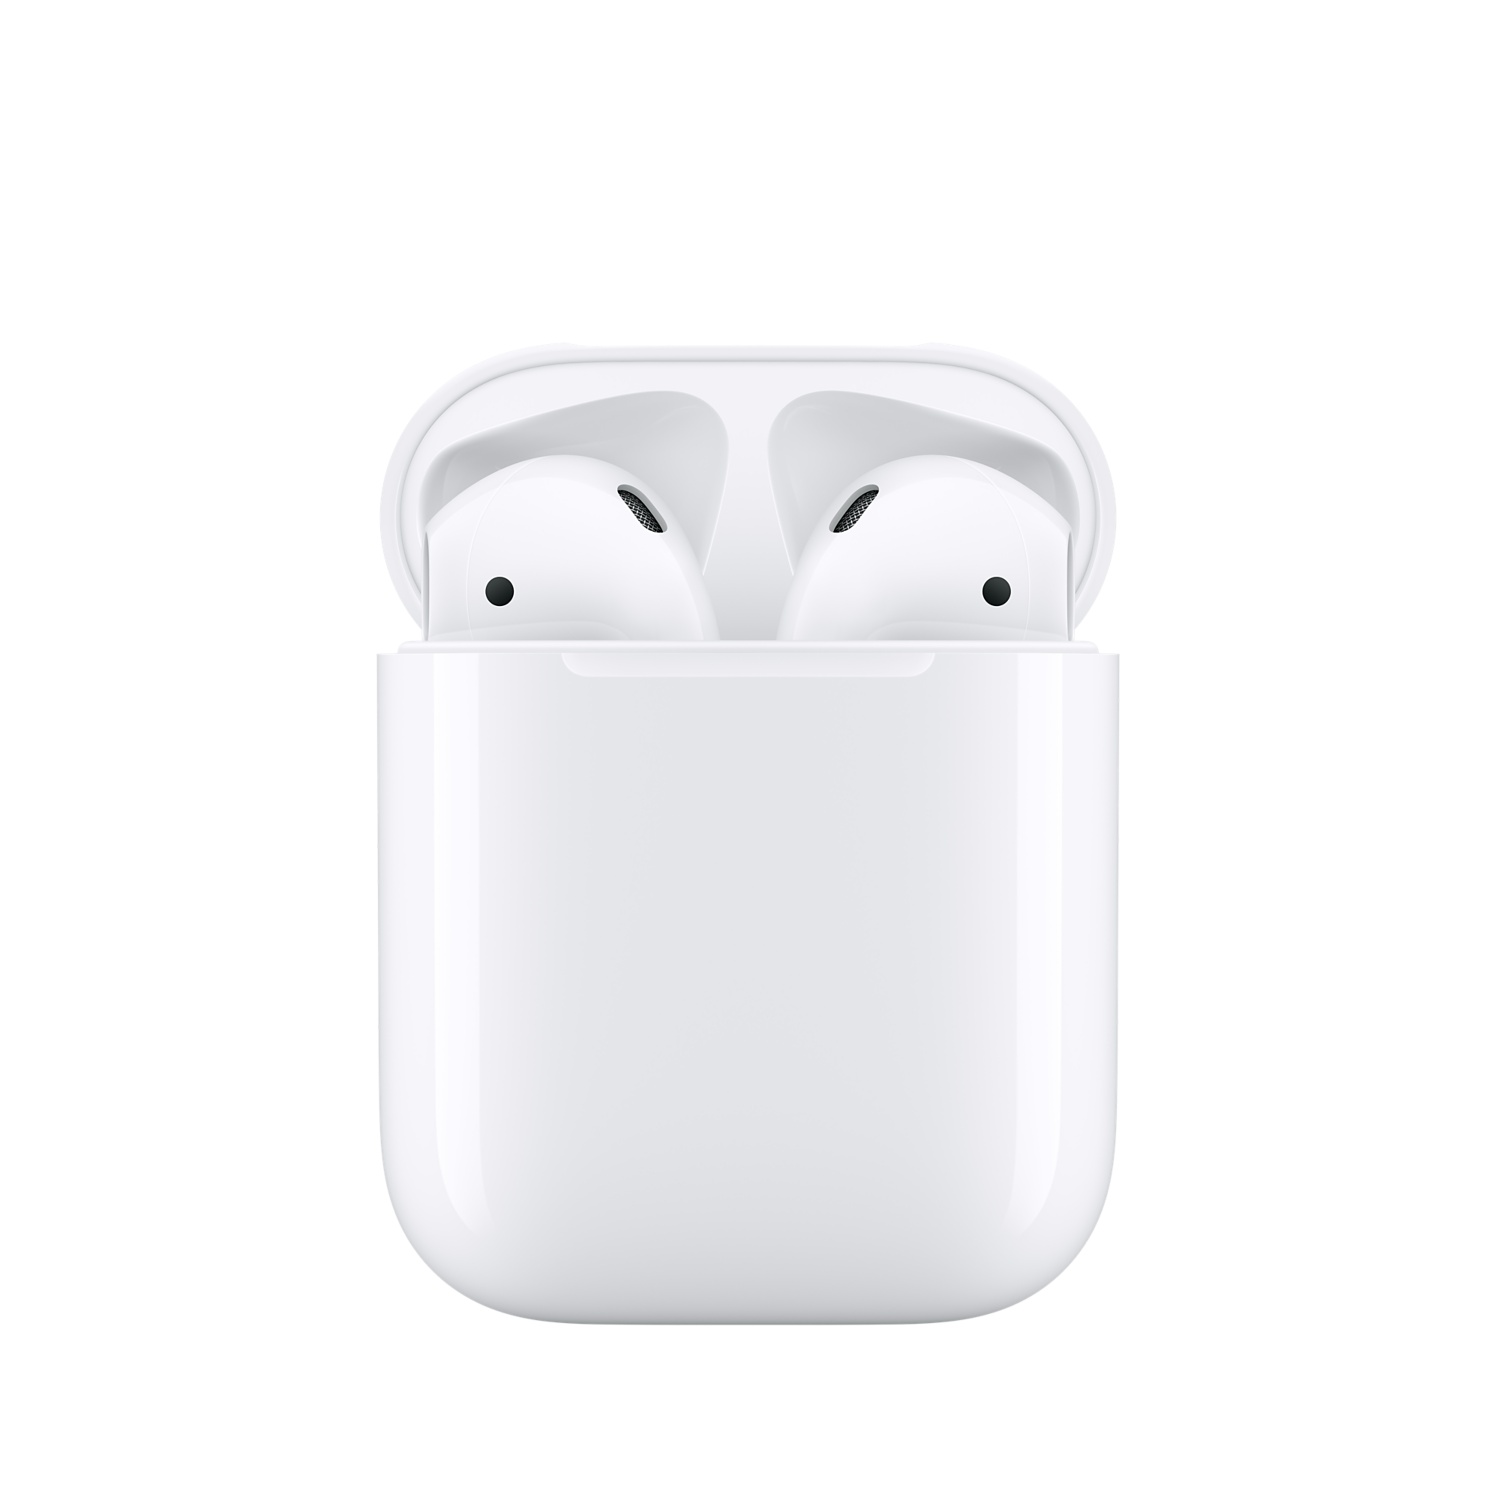 Apple Airpods in case